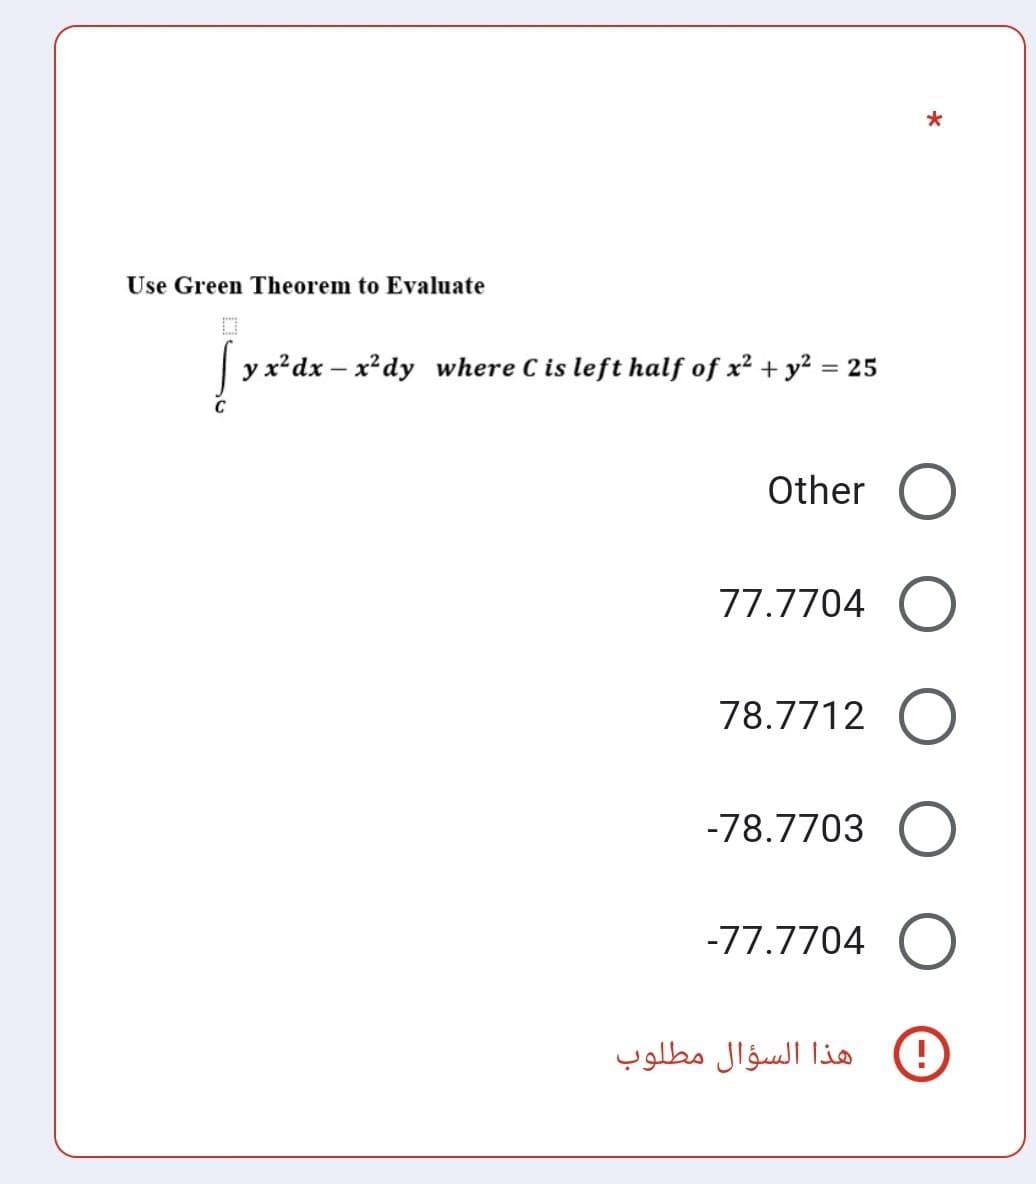 Use Green Theorem to Evaluate
y x²dx – x²dy where C is left half of x² + y² = 25
C
Other
77.7704
78.7712
-78.7703
-77.7704
هذا السؤال مطلوب
